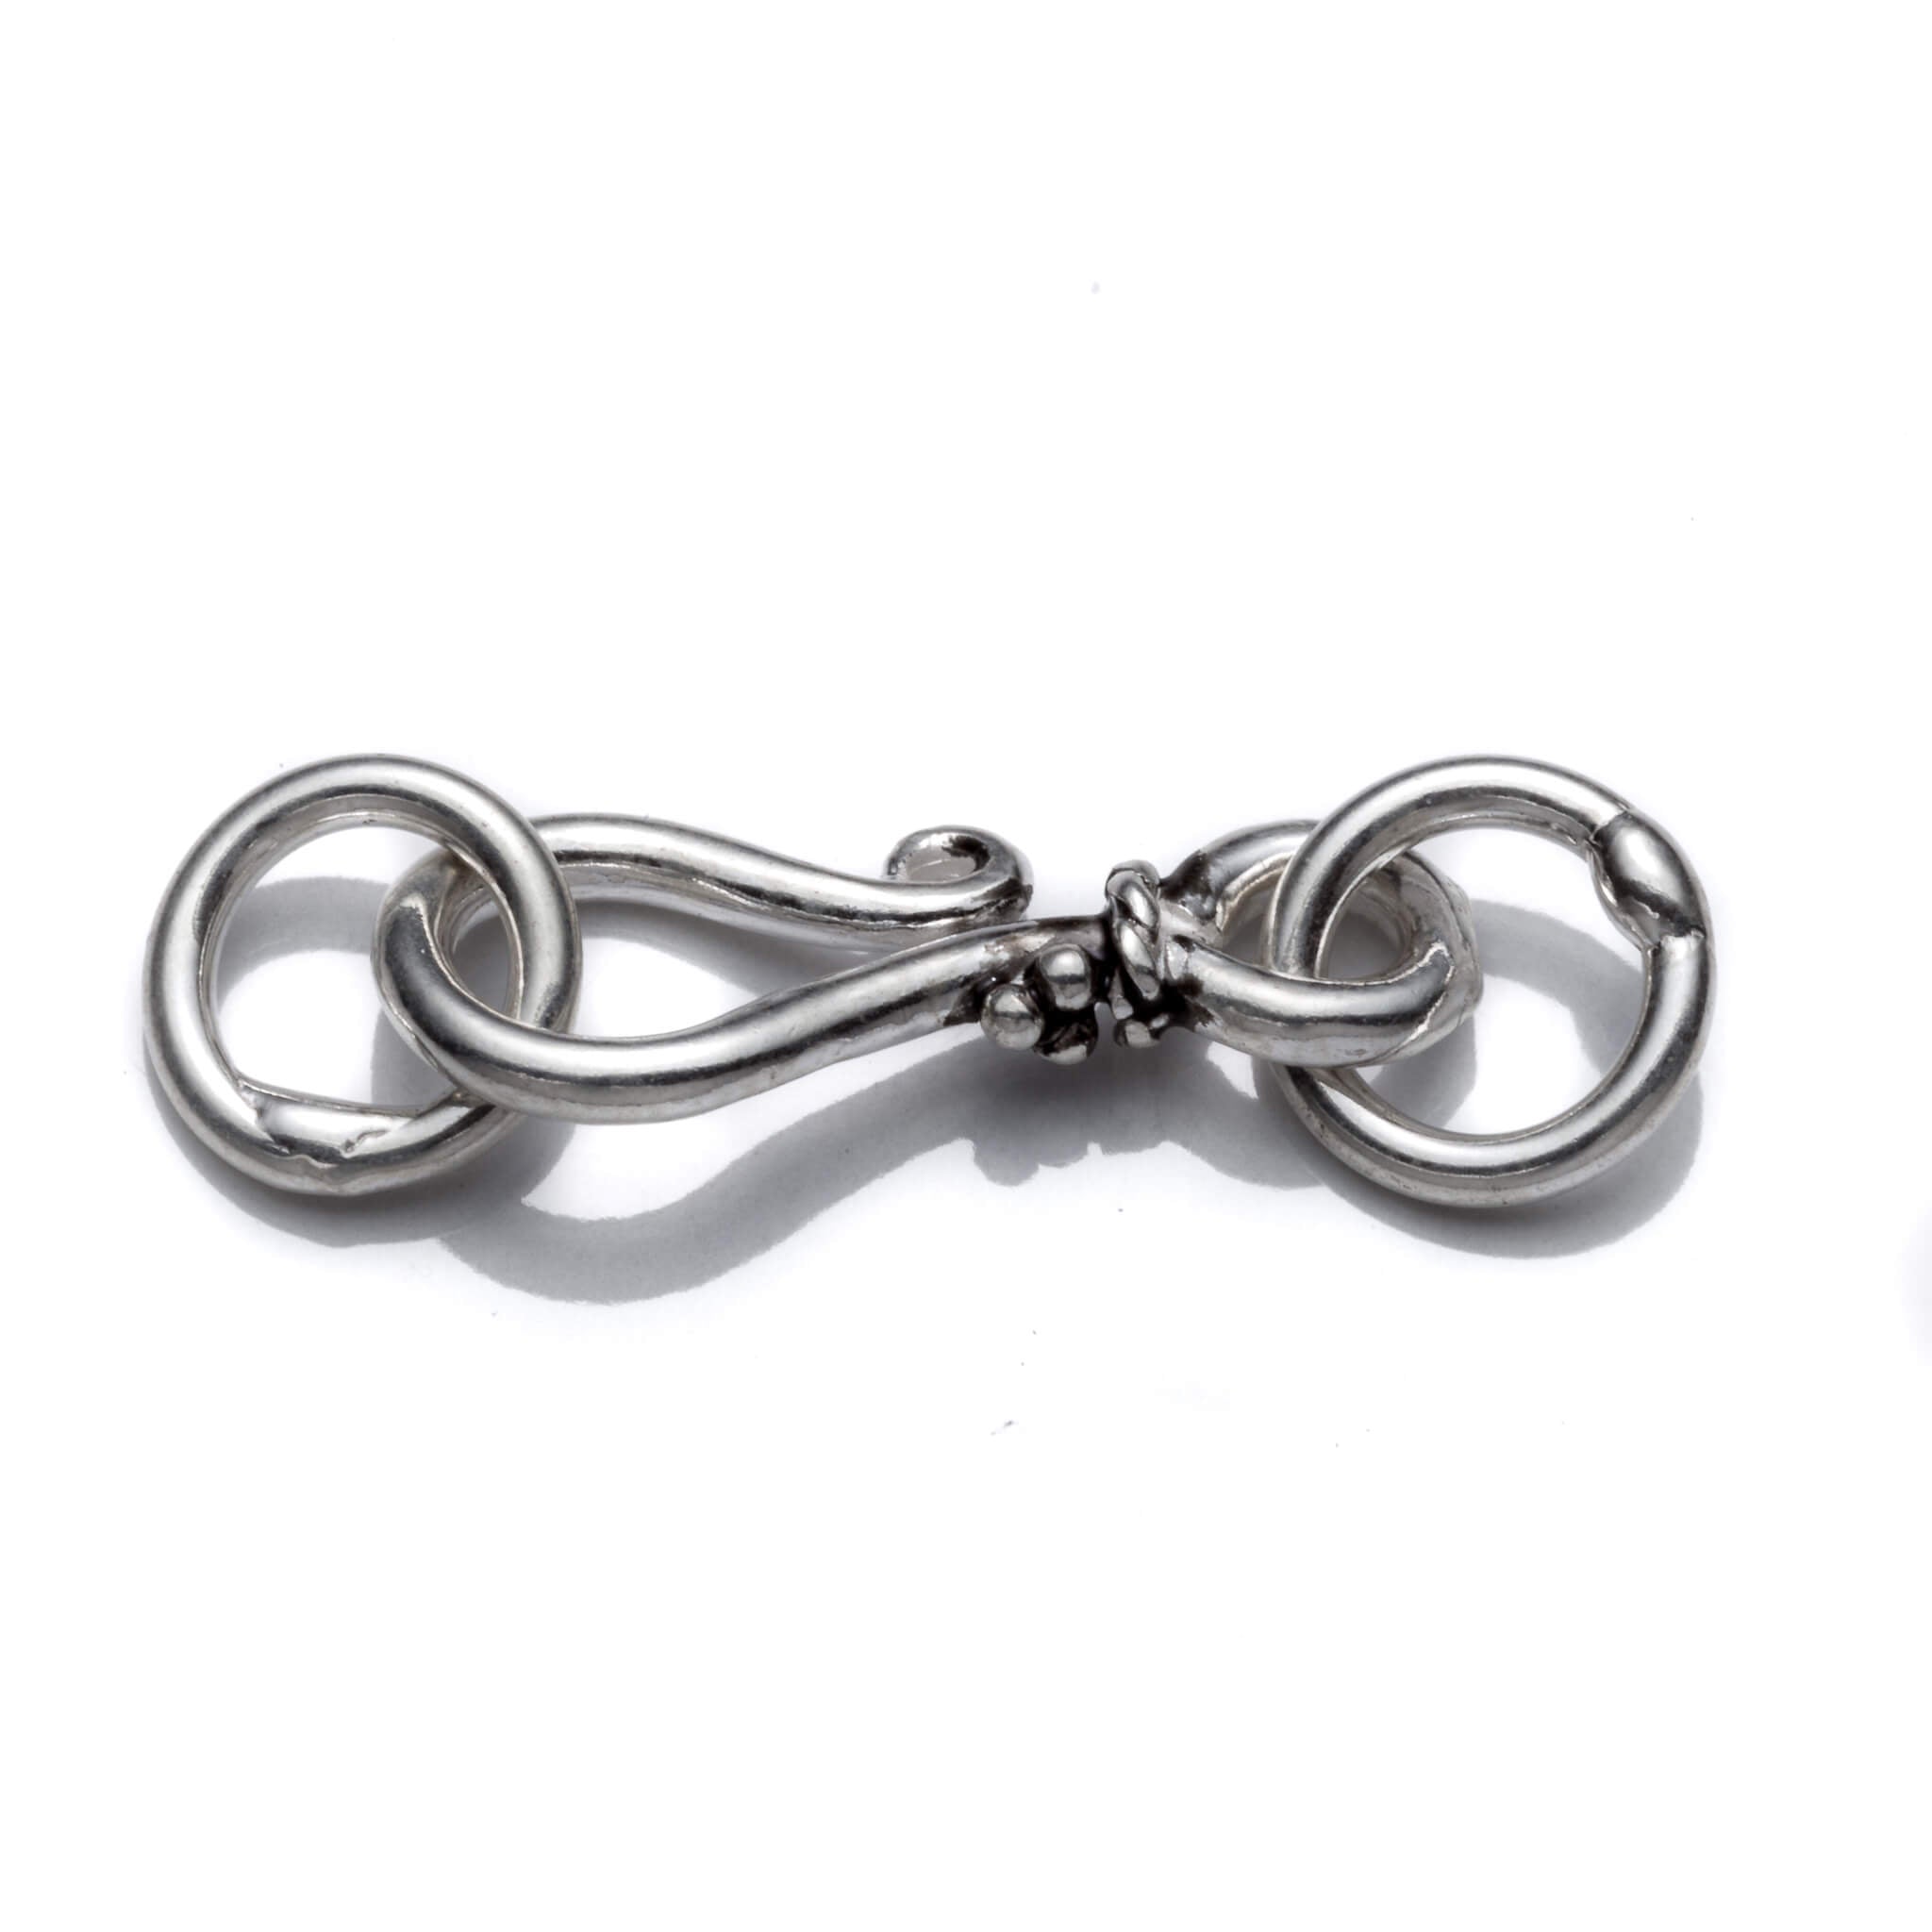 Fish-Hook Clasp Sterling Silver 6.1x23.4mm 17 Gauge